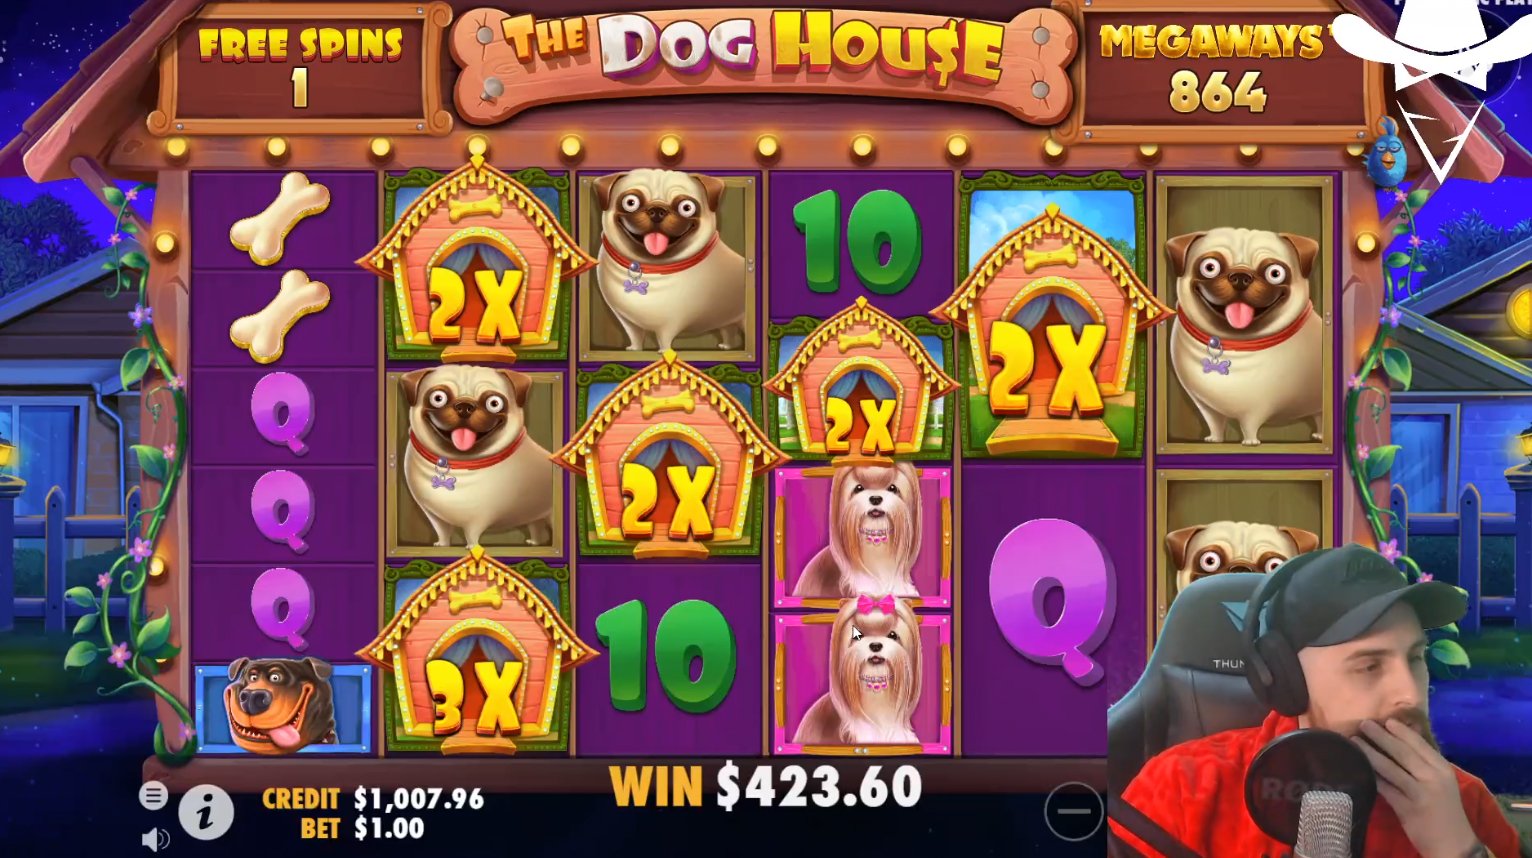 Home to 10,000+ Free Online Pokie Games